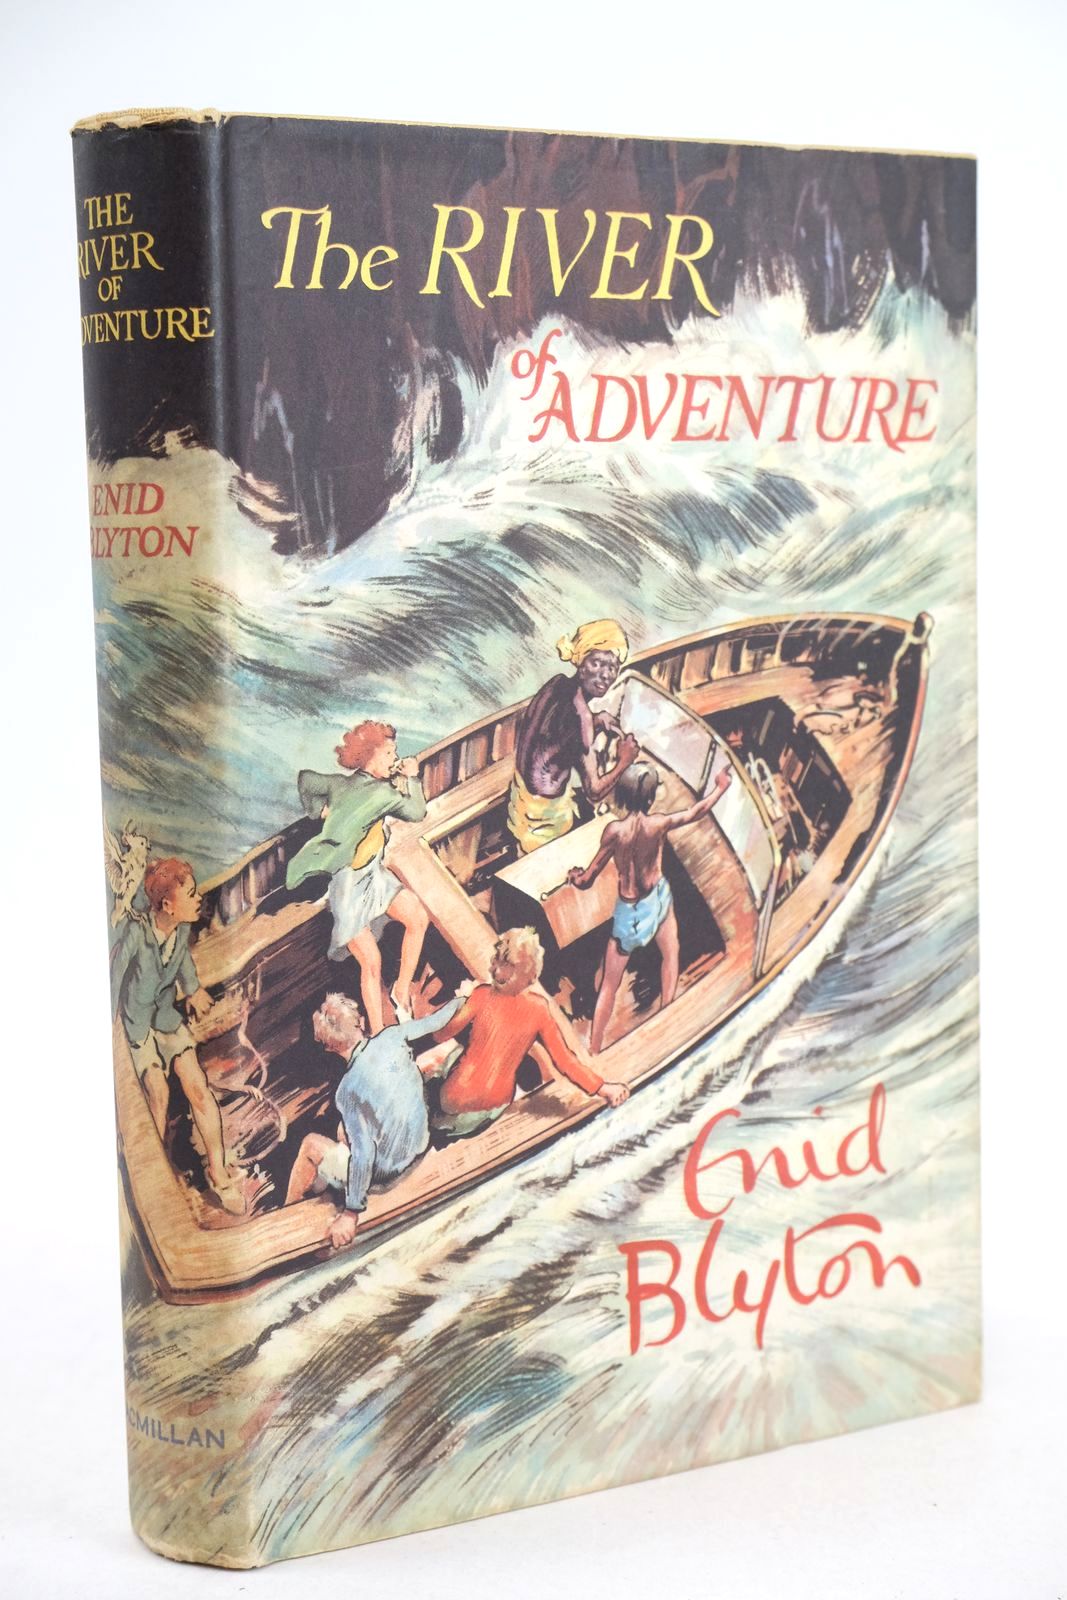 Photo of THE RIVER OF ADVENTURE written by Blyton, Enid illustrated by Tresilian, Stuart published by Macmillan & Co. Ltd. (STOCK CODE: 1325771)  for sale by Stella & Rose's Books